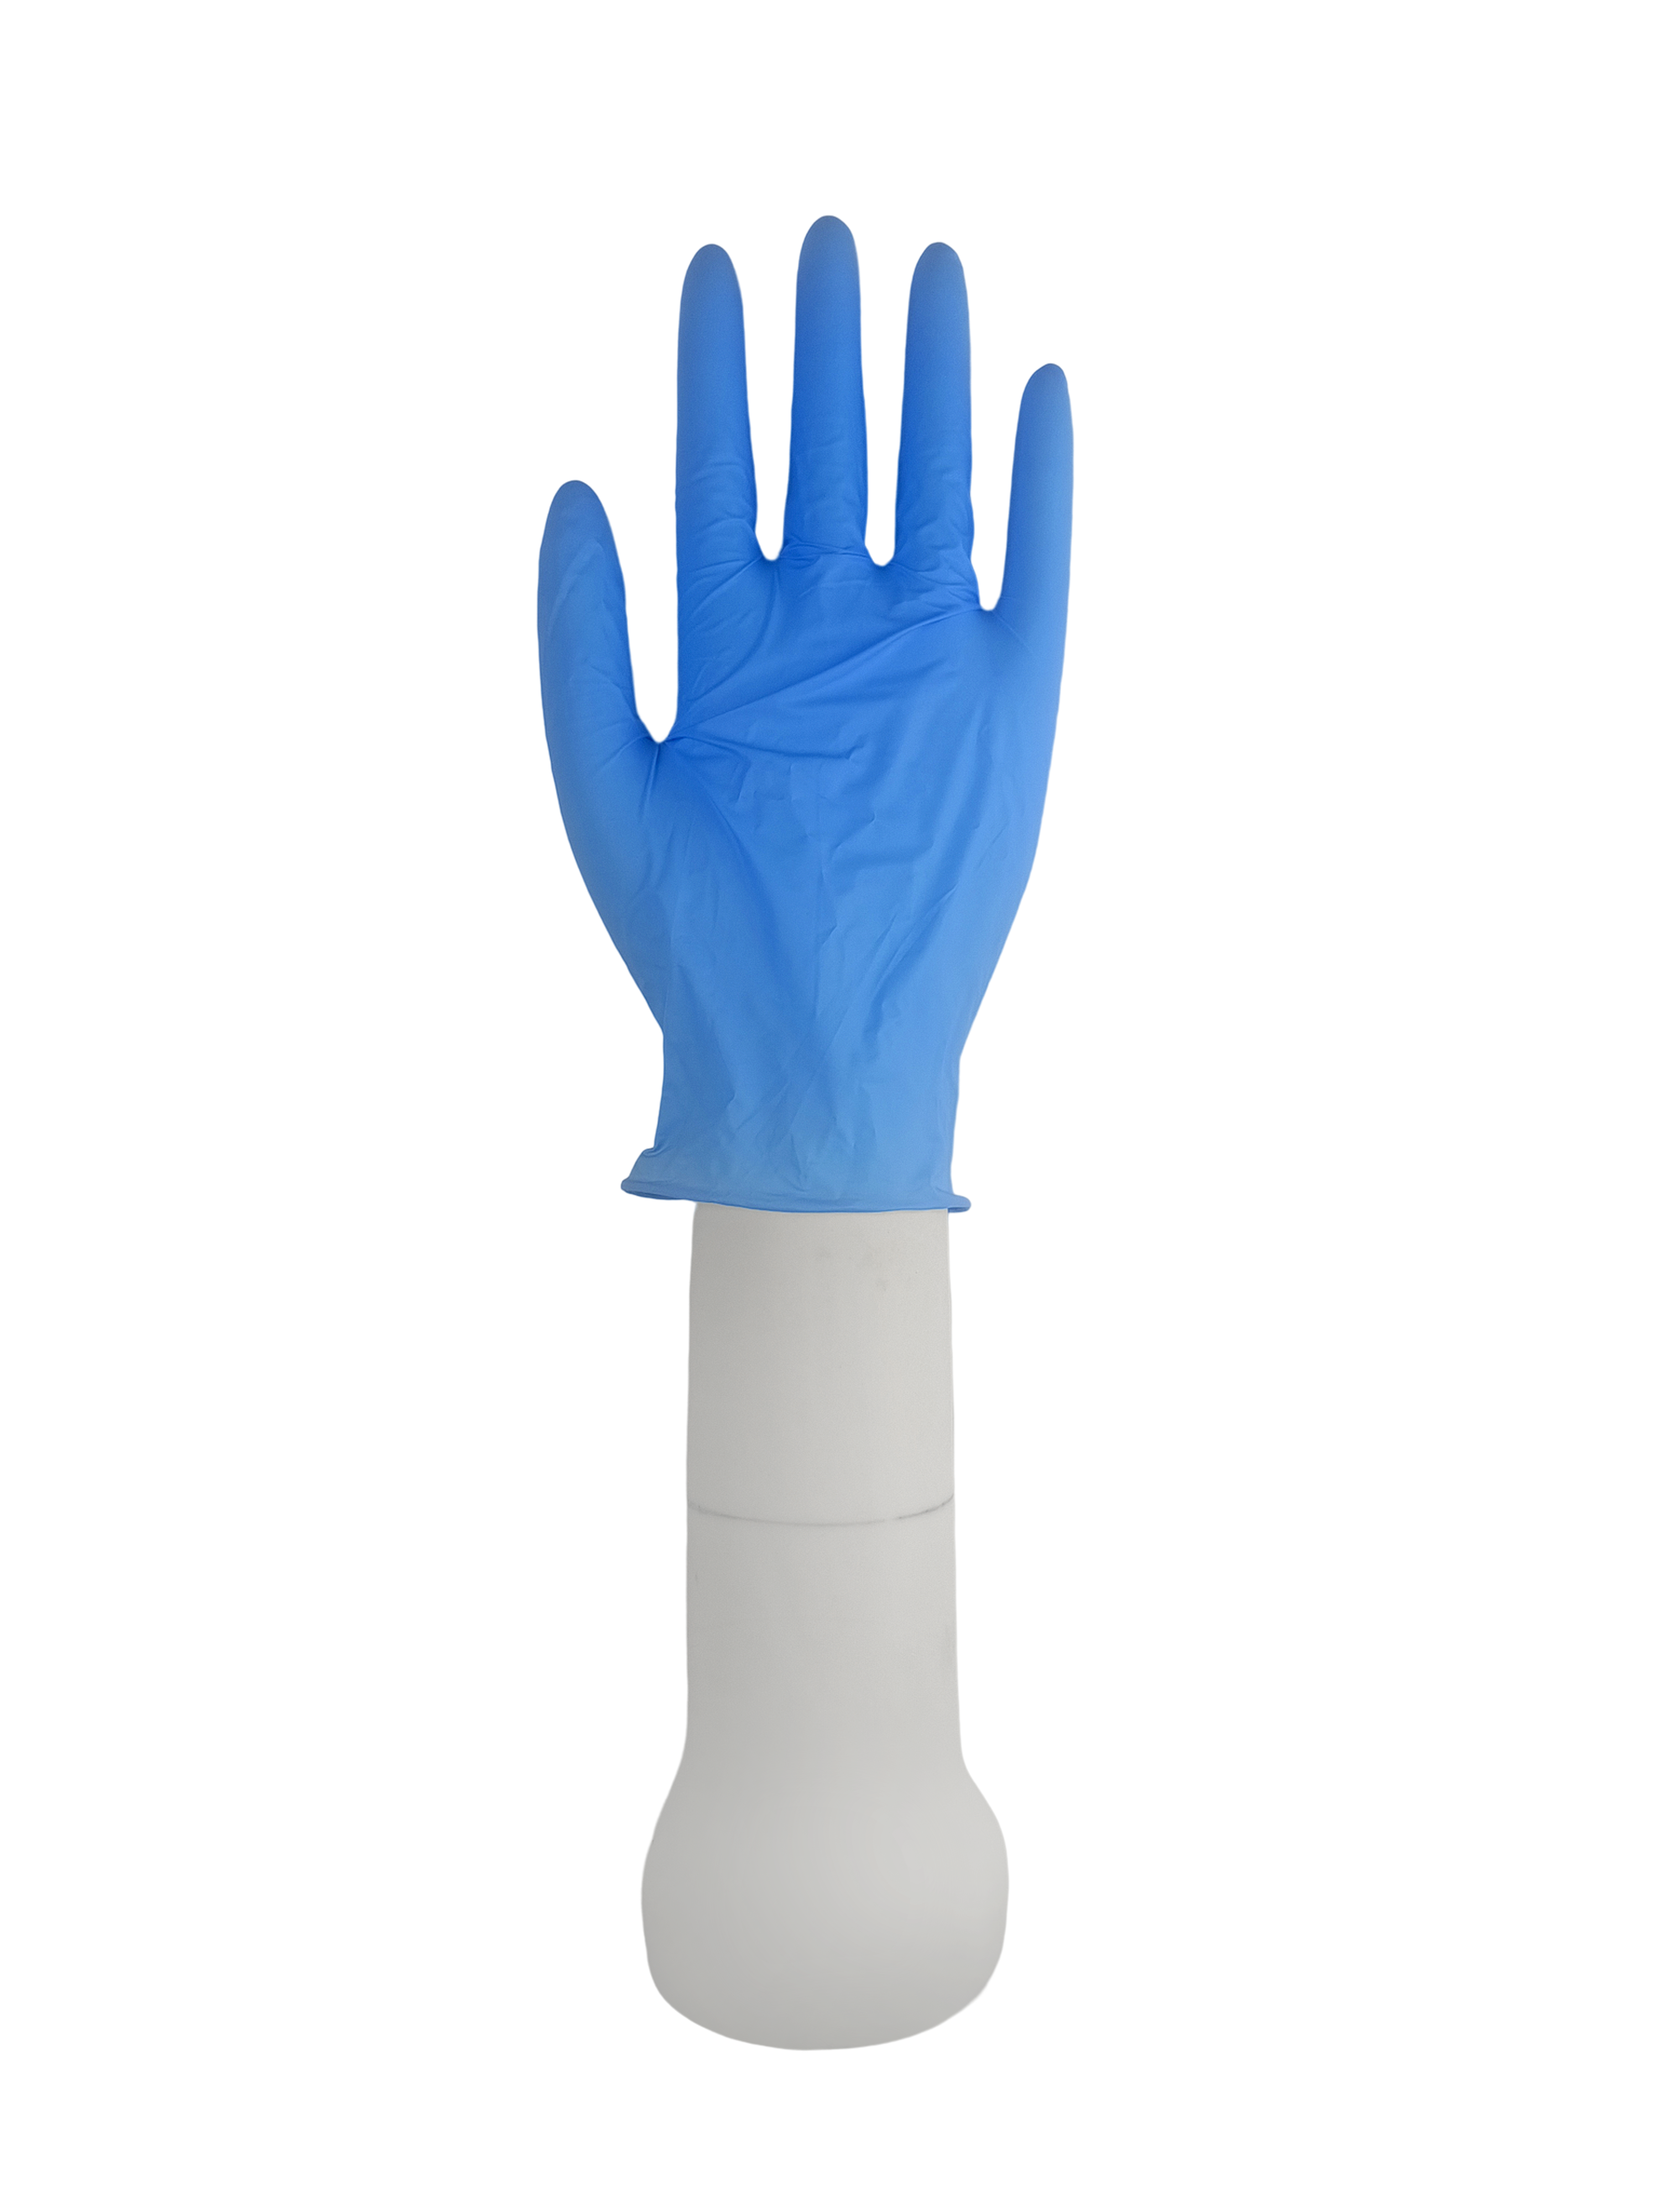 Disposable nitrile protective gloves